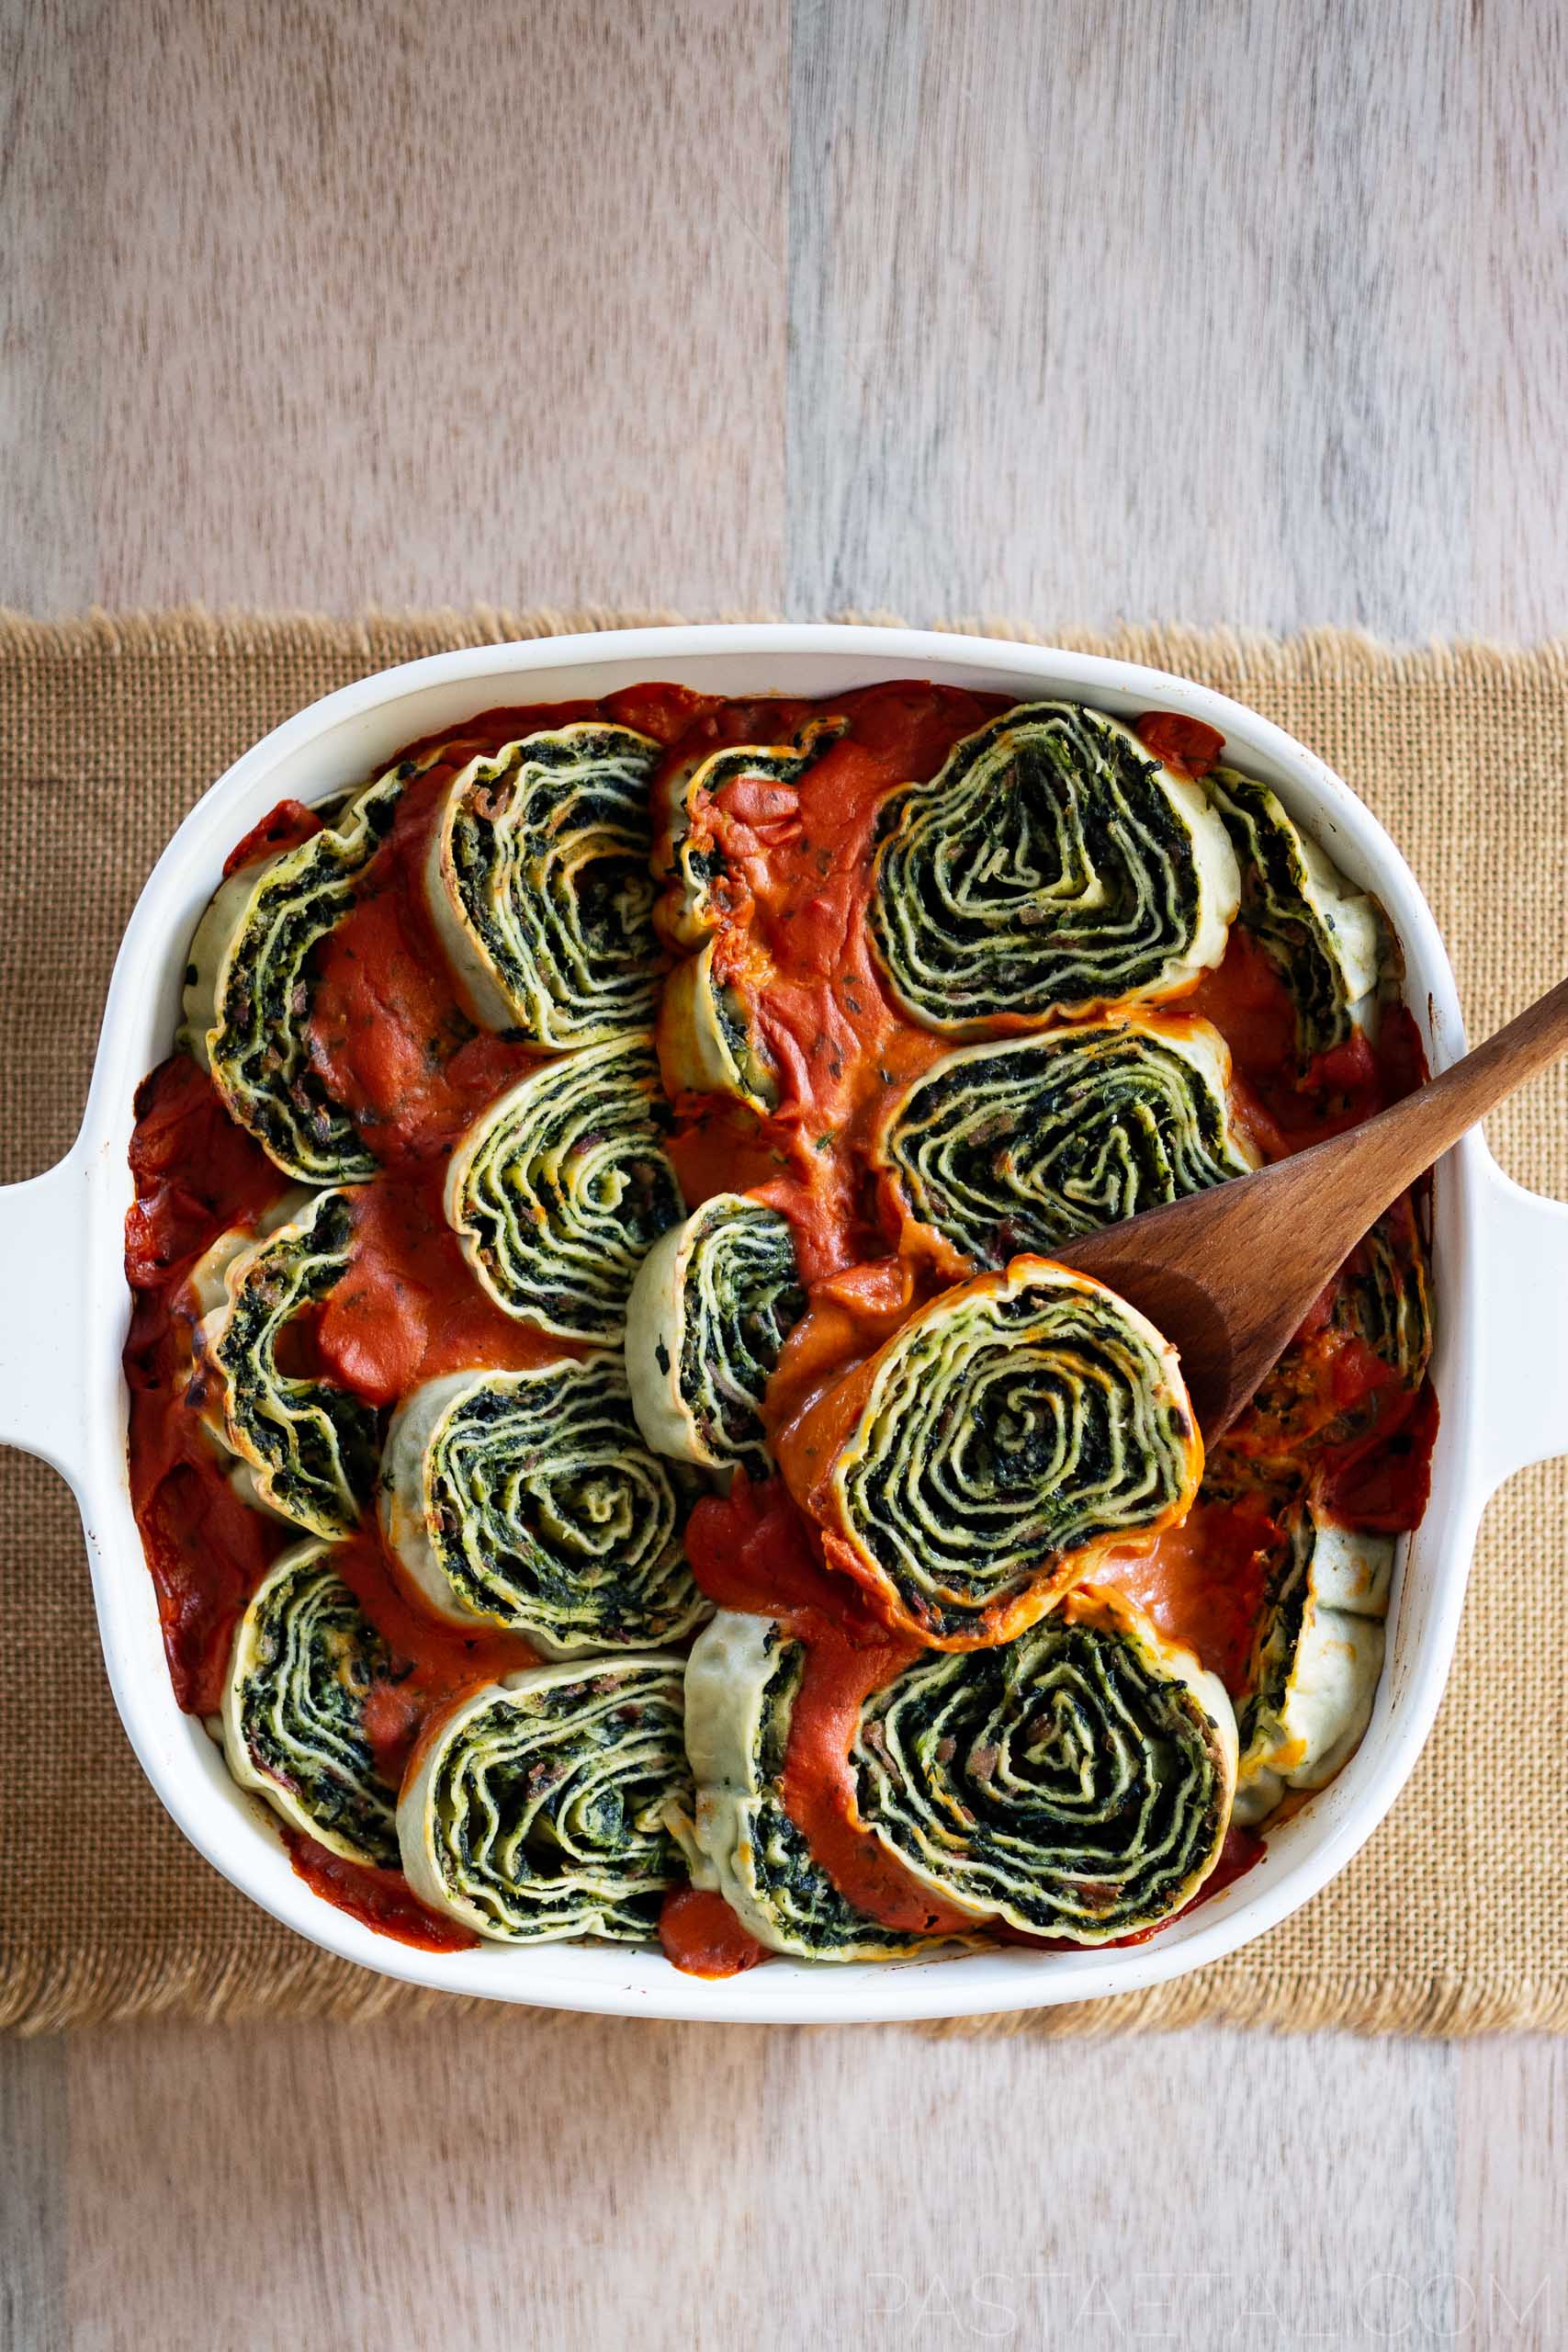 https://pastaetal.com/wp-content/uploads/2020/12/spinach-and-ricotta-rotolo-pasta-with-tomato-and-bechamel-sauce-in-a-baking-dish-with-a-wooden-spoon.jpg